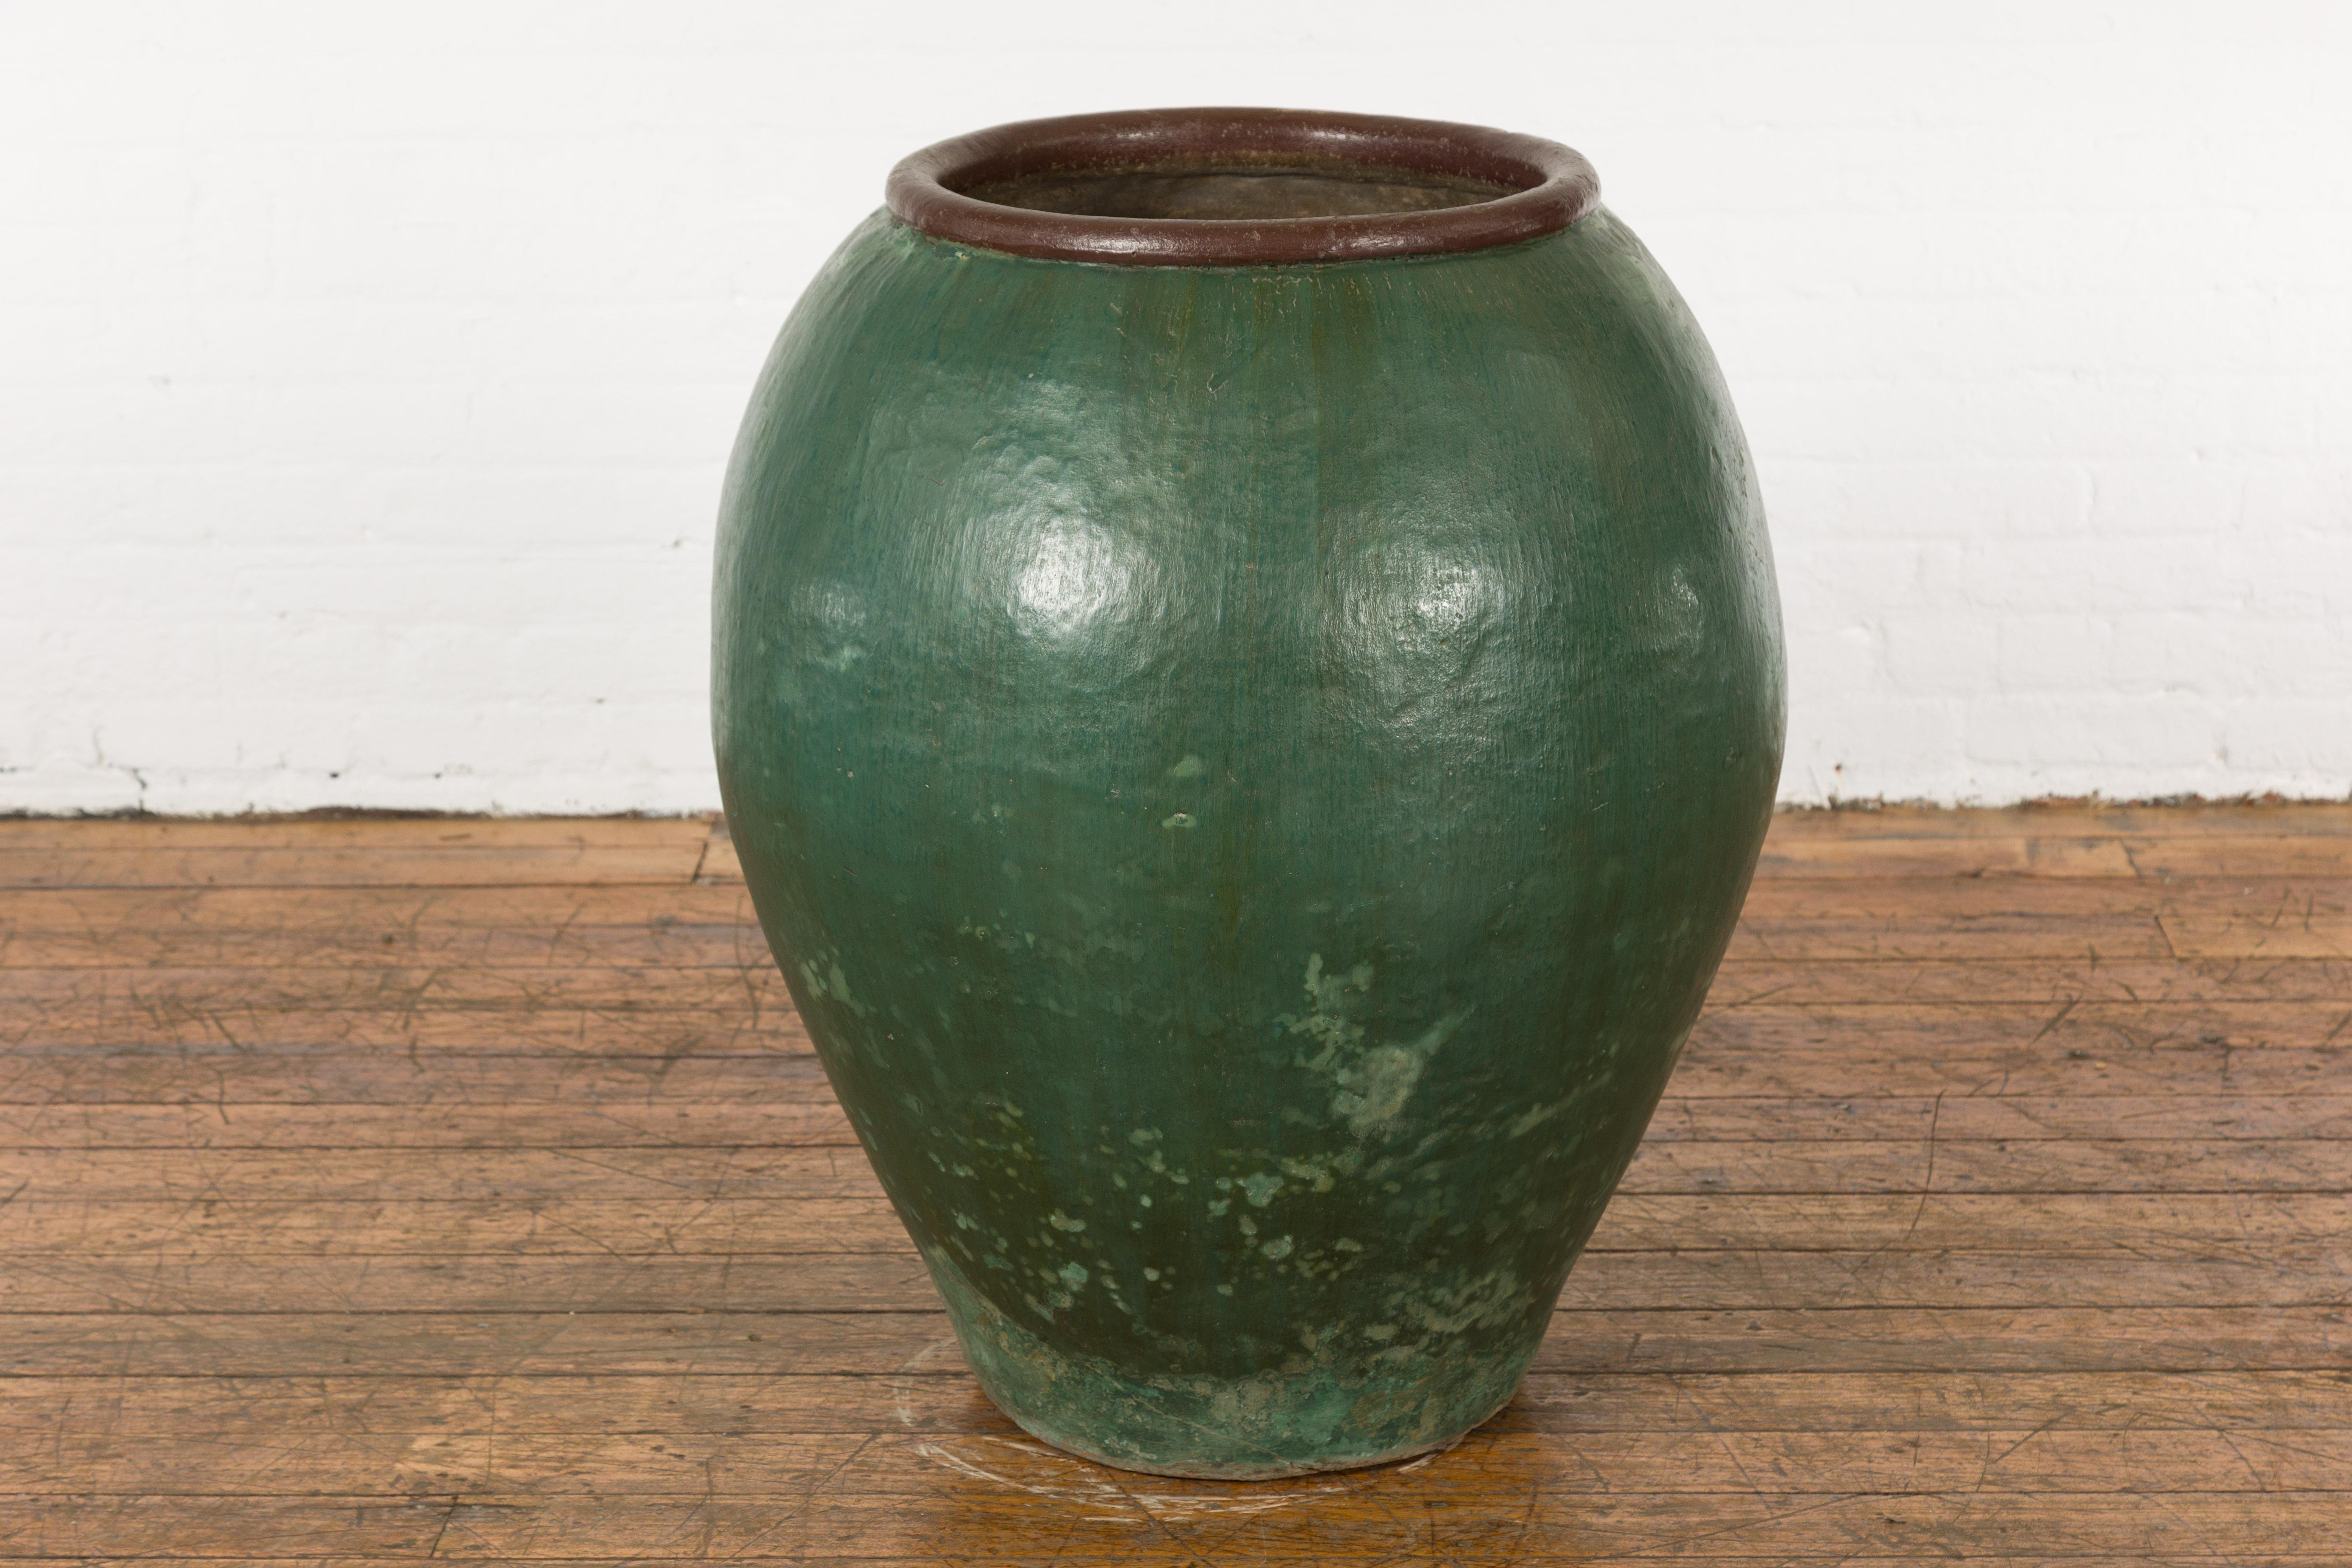 A large Thai green glazed ceramic jar from the mid 20th century with brown lip and nicely weathered appearance. Charming us with its large proportions and slightly weathered appearance revealing its age and use, this green glazed ceramic planter was